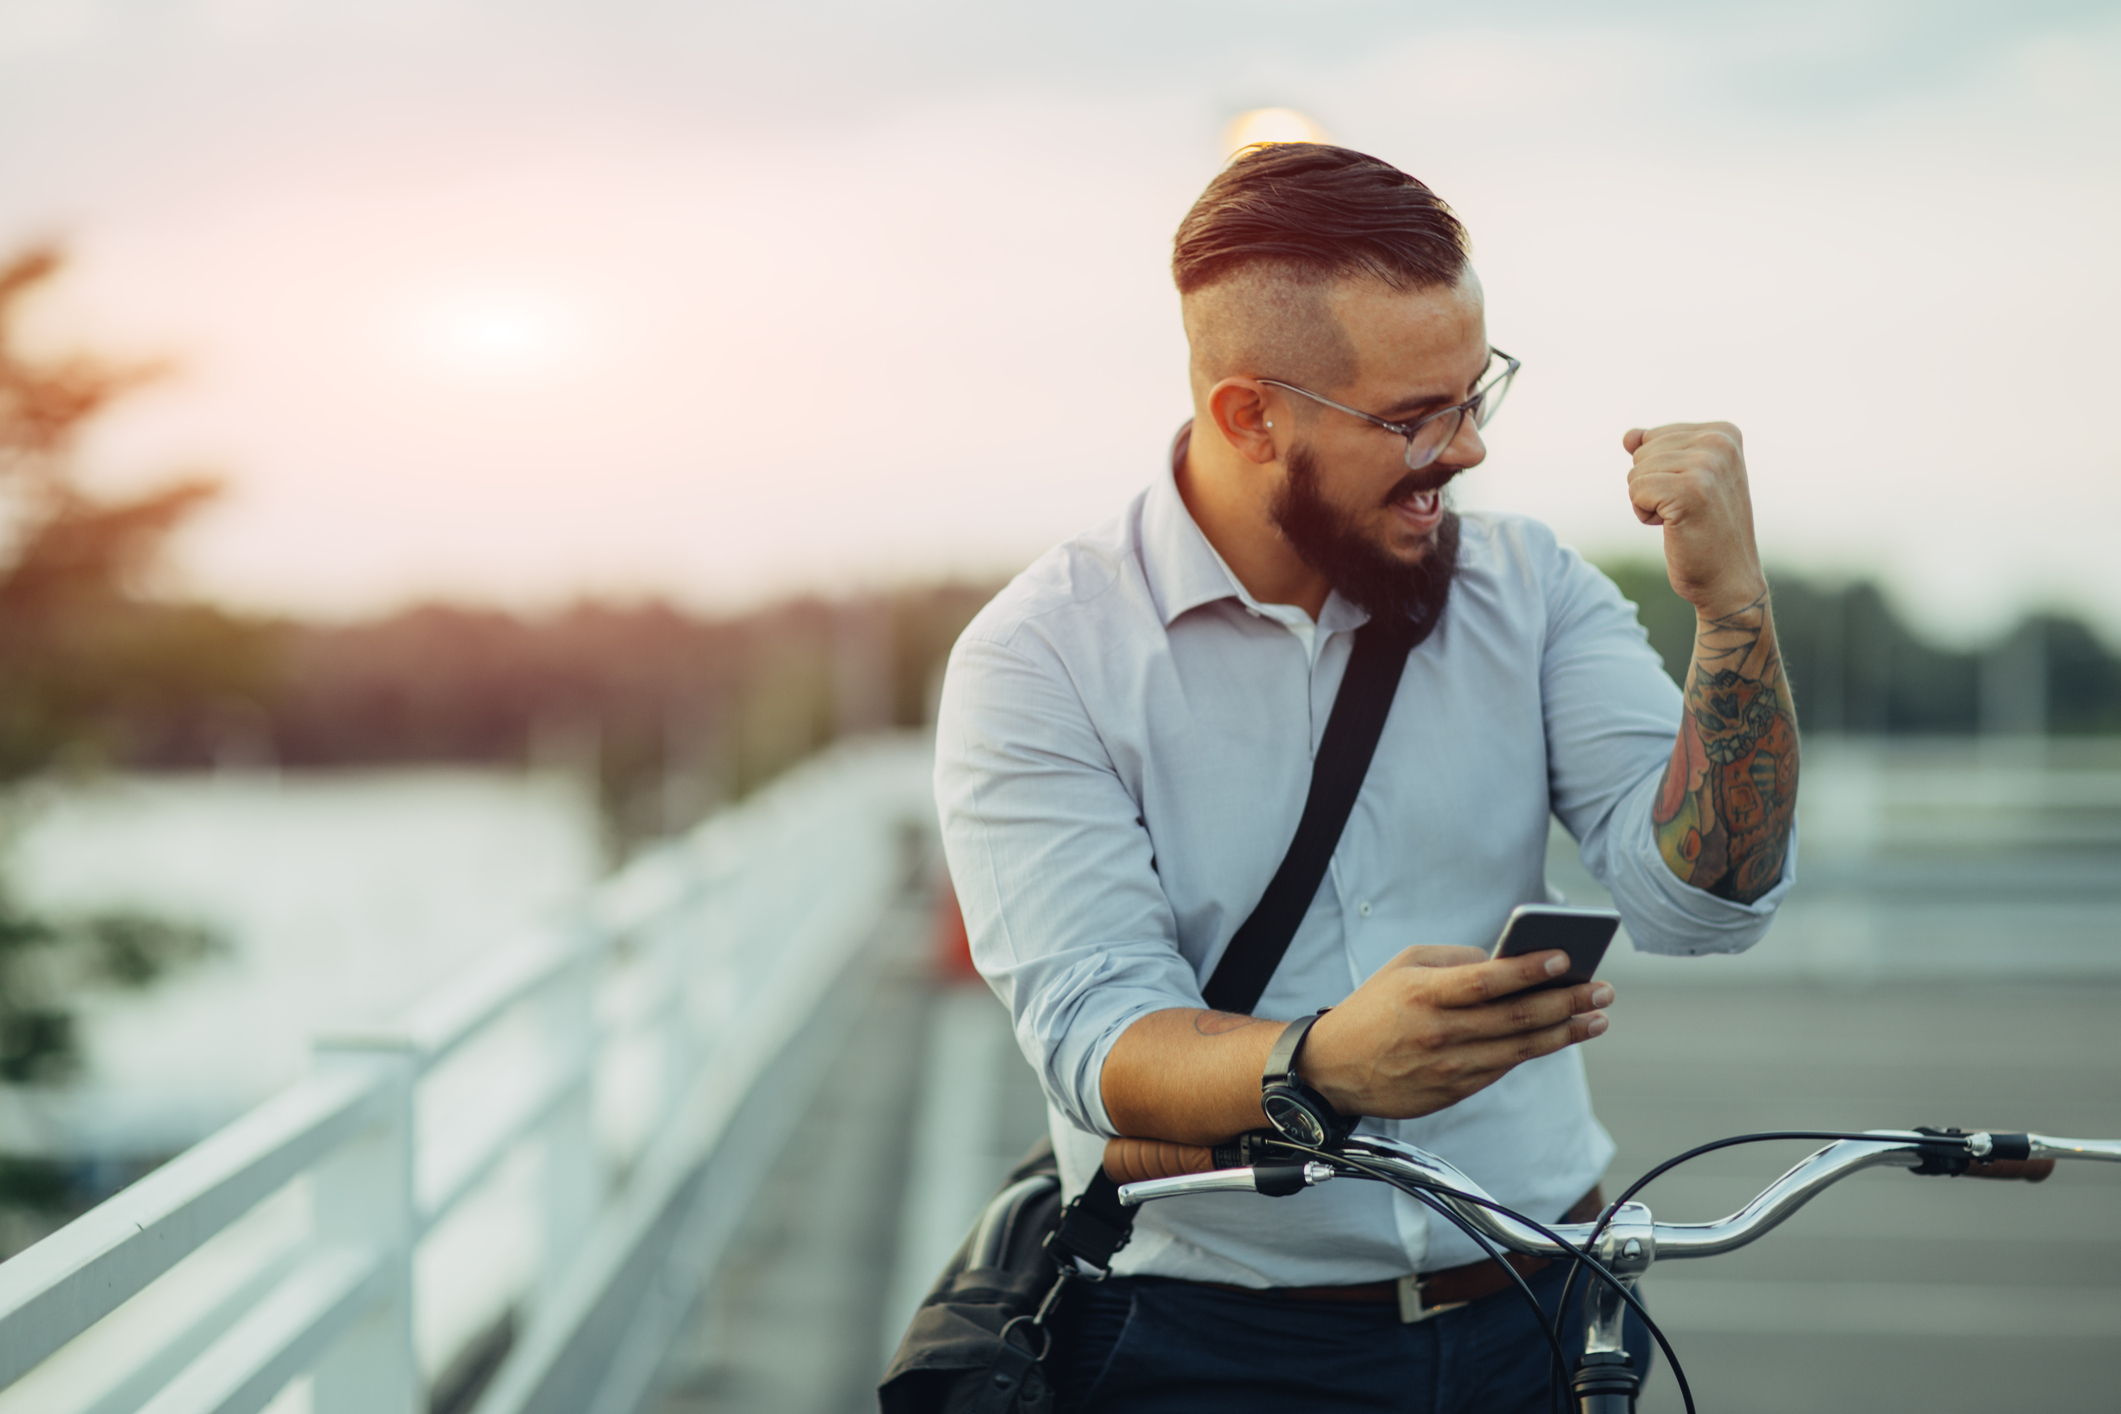 Young Businessman pushing his city bicycle and using his smart phone. He has tattoos and hipster haircut. He just got positive reports from stock market. Using app on his smart phone. He is celebrating his success with fist up.